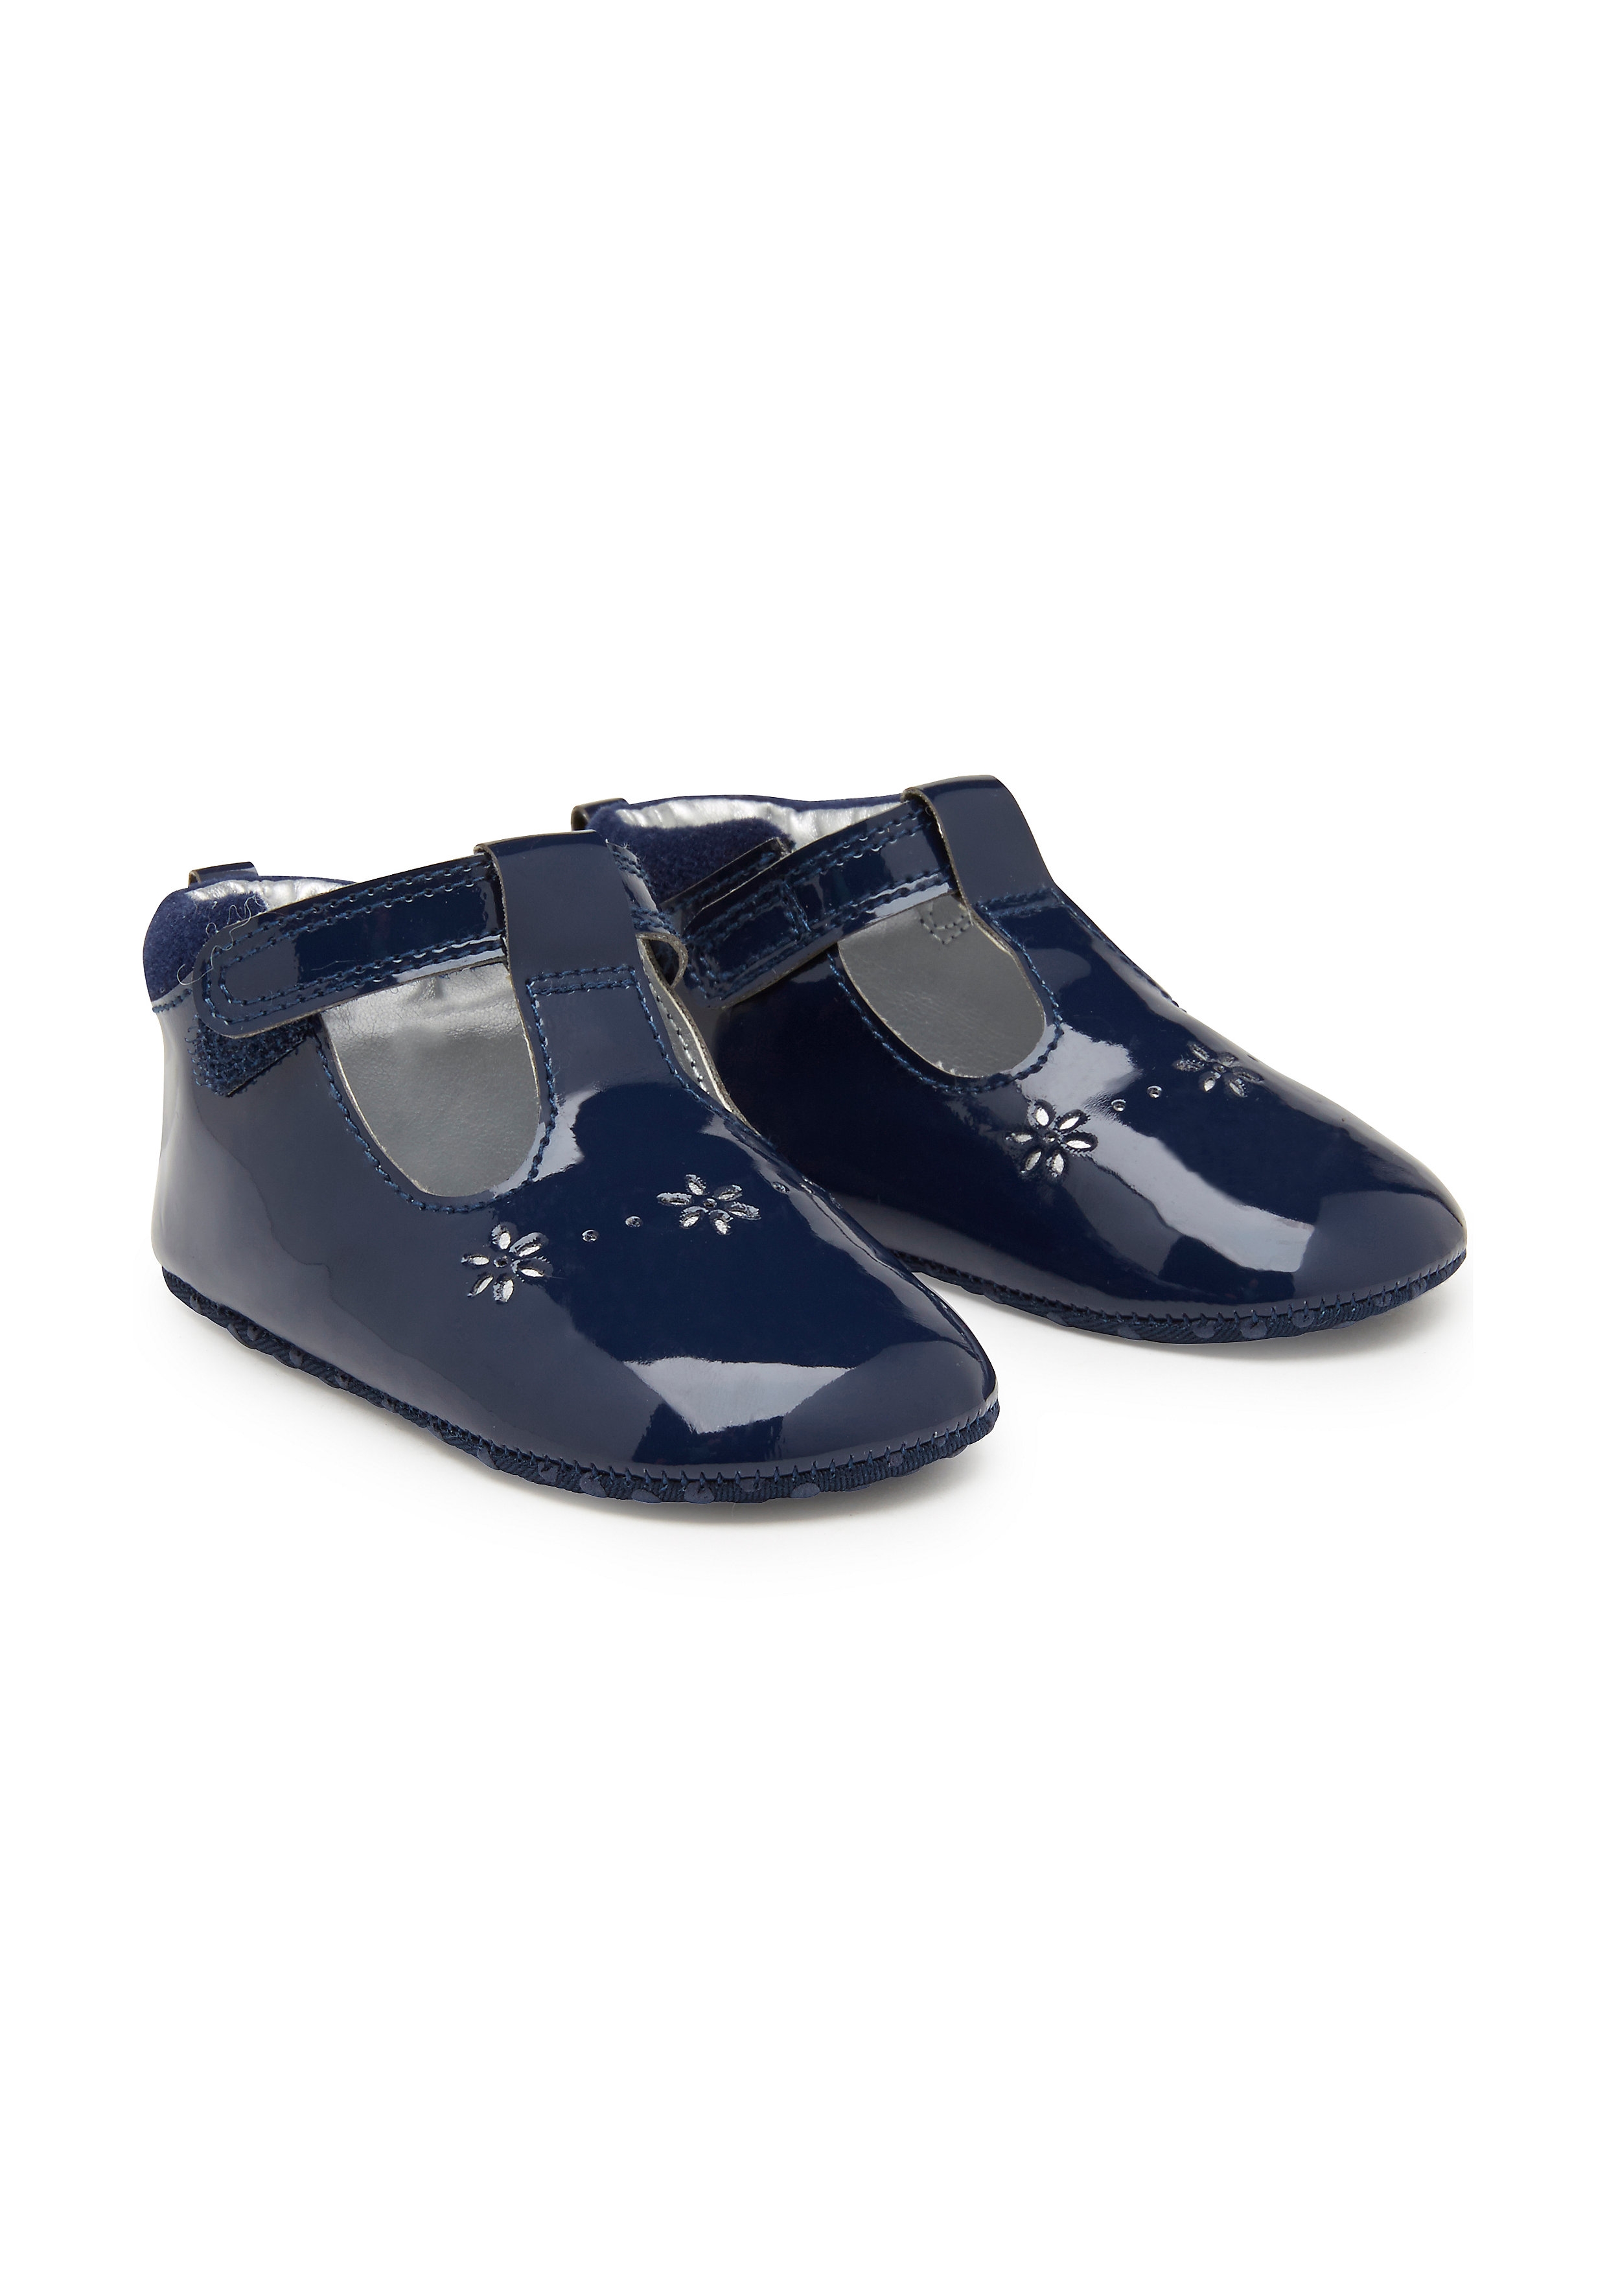 Mothercare | Girls Cut Out Shoes - Navy